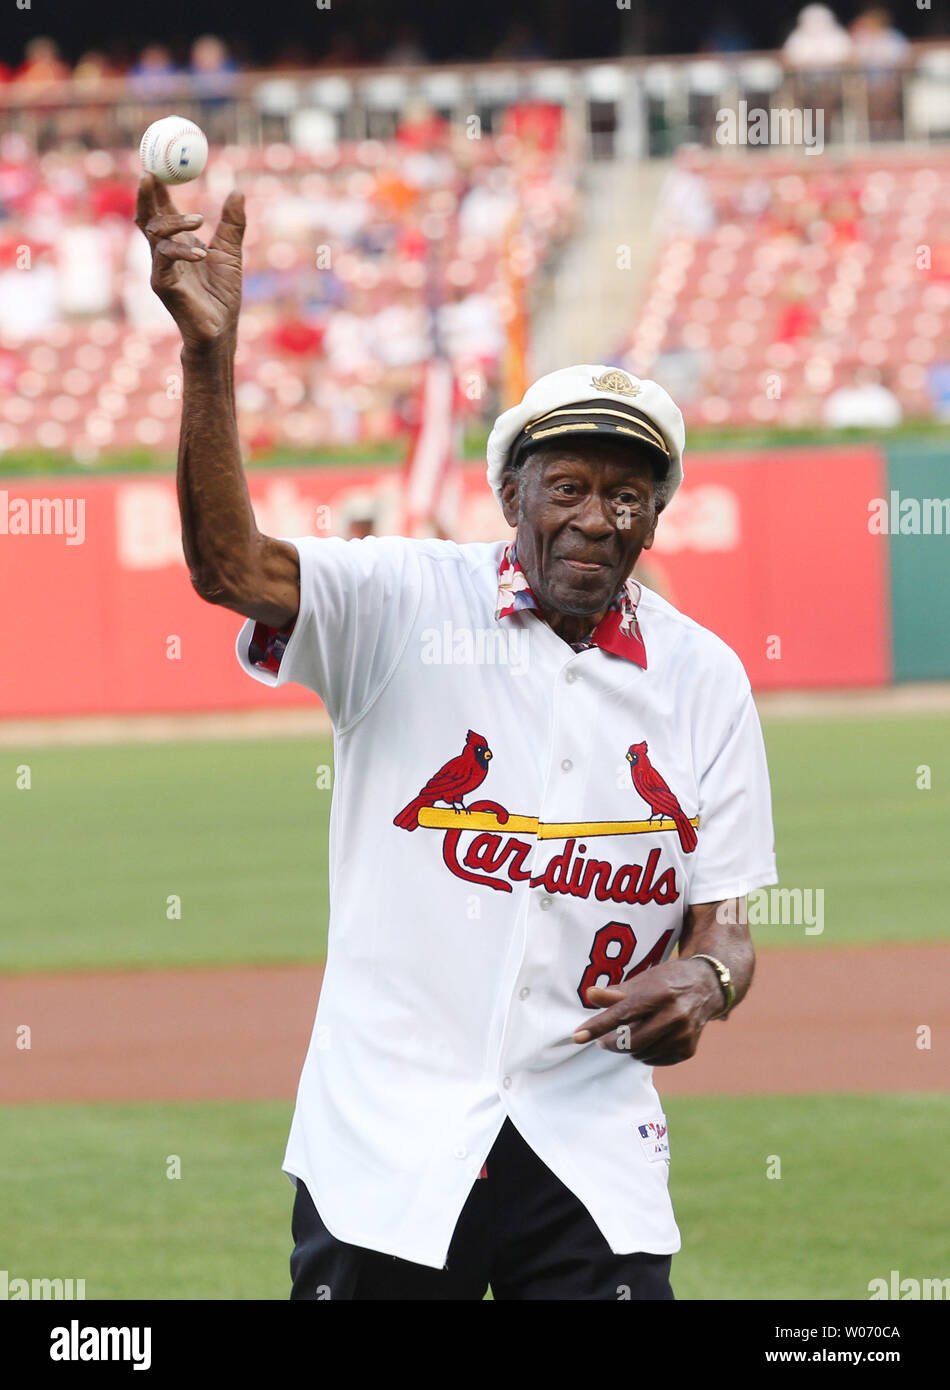 Rock and Roll legend Chuck Berry throws a ceremonial first pitch before the  Chicago Cubs-St.